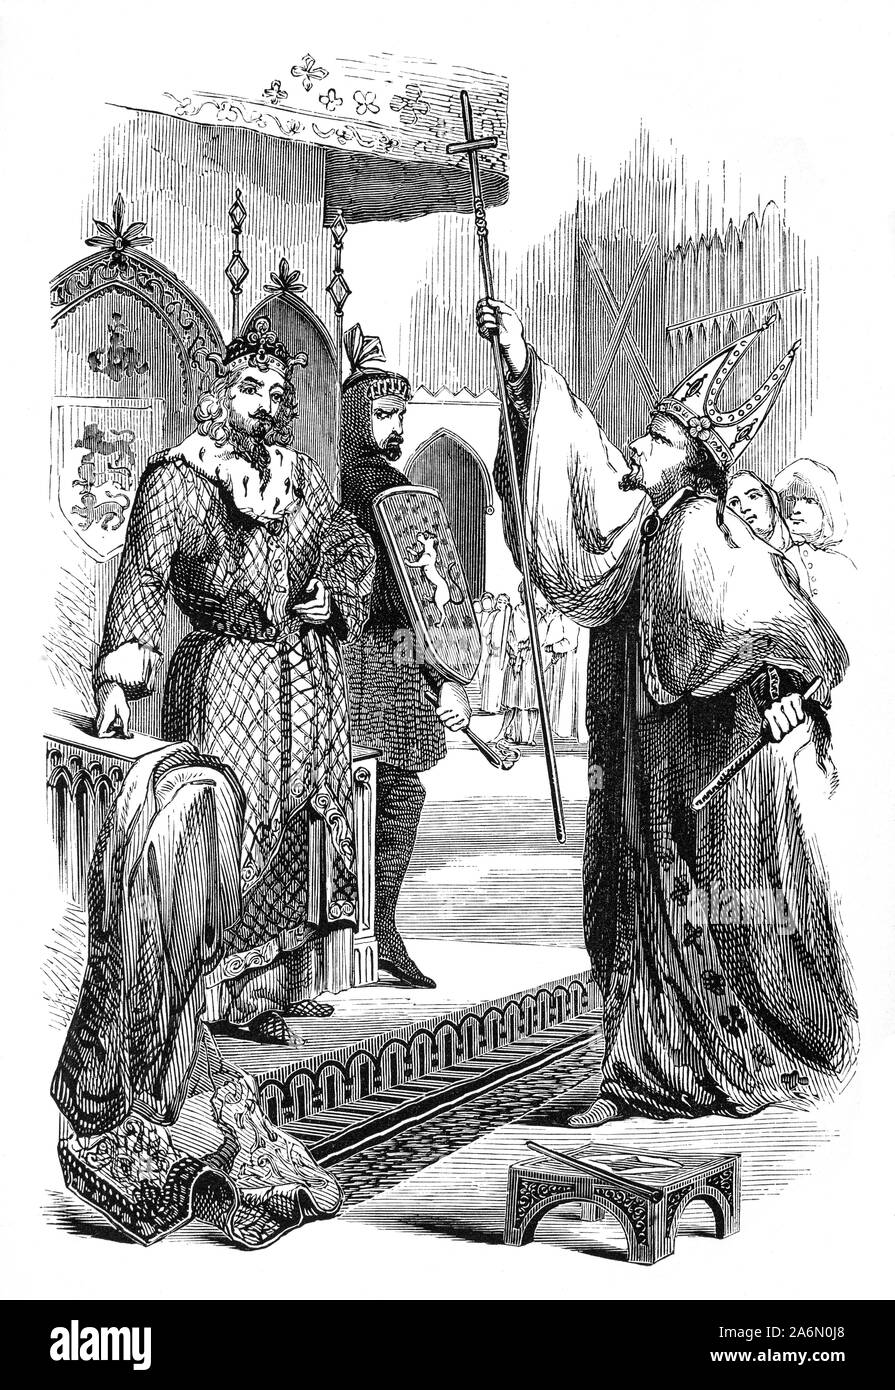 Henry II swearing to observe the  Charter of Liberties, also called the Coronation Charter, a written proclamation by Henry I of England, issued upon his accession to the throne in 1100. It sought to bind the King to certain laws regarding the treatment of nobles, church officials, and individuals. Stock Photo